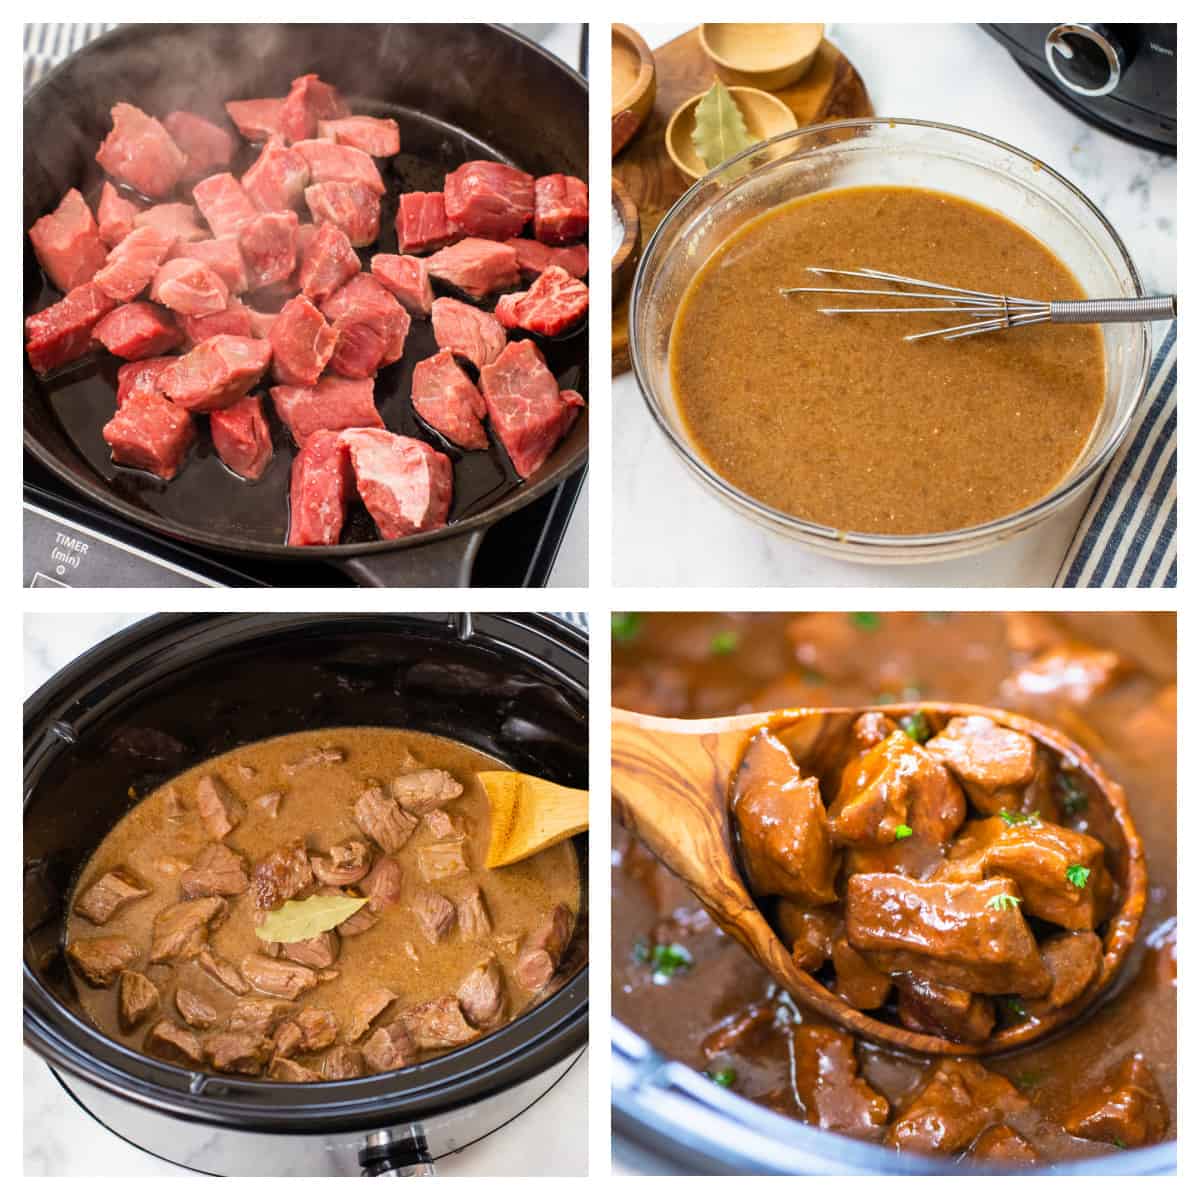 Collage showing how to make beef tips and gravy in the crockpot.